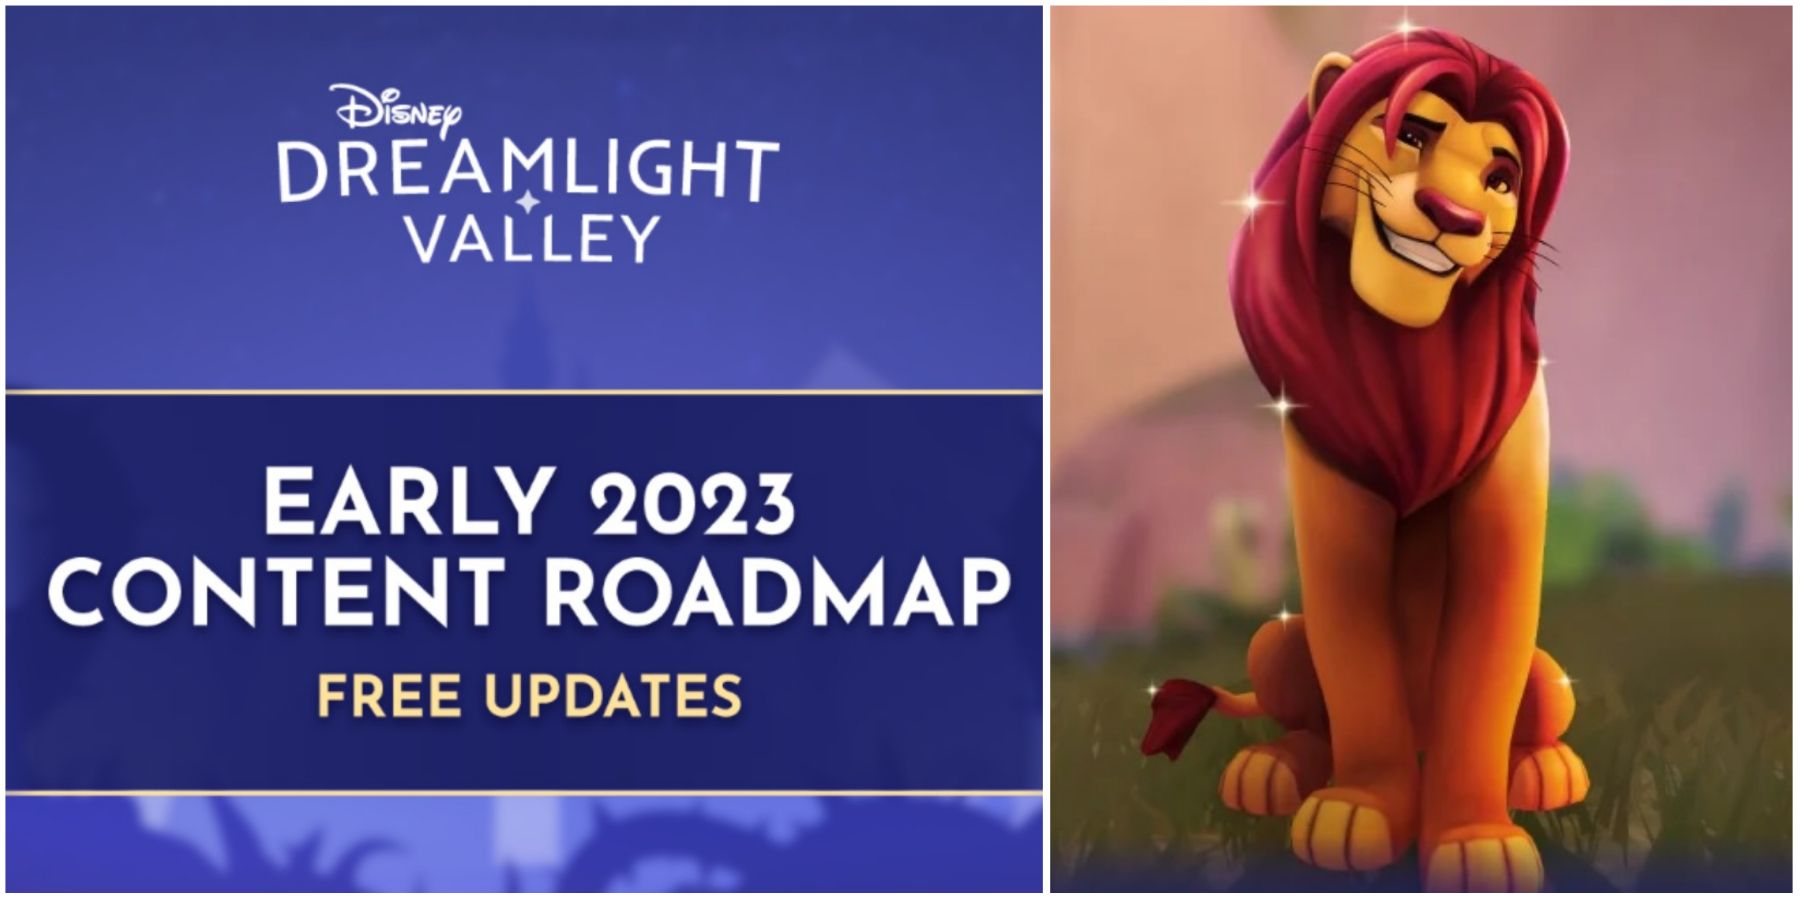 All The Stitch Content Added to Disney Dreamlight Valley